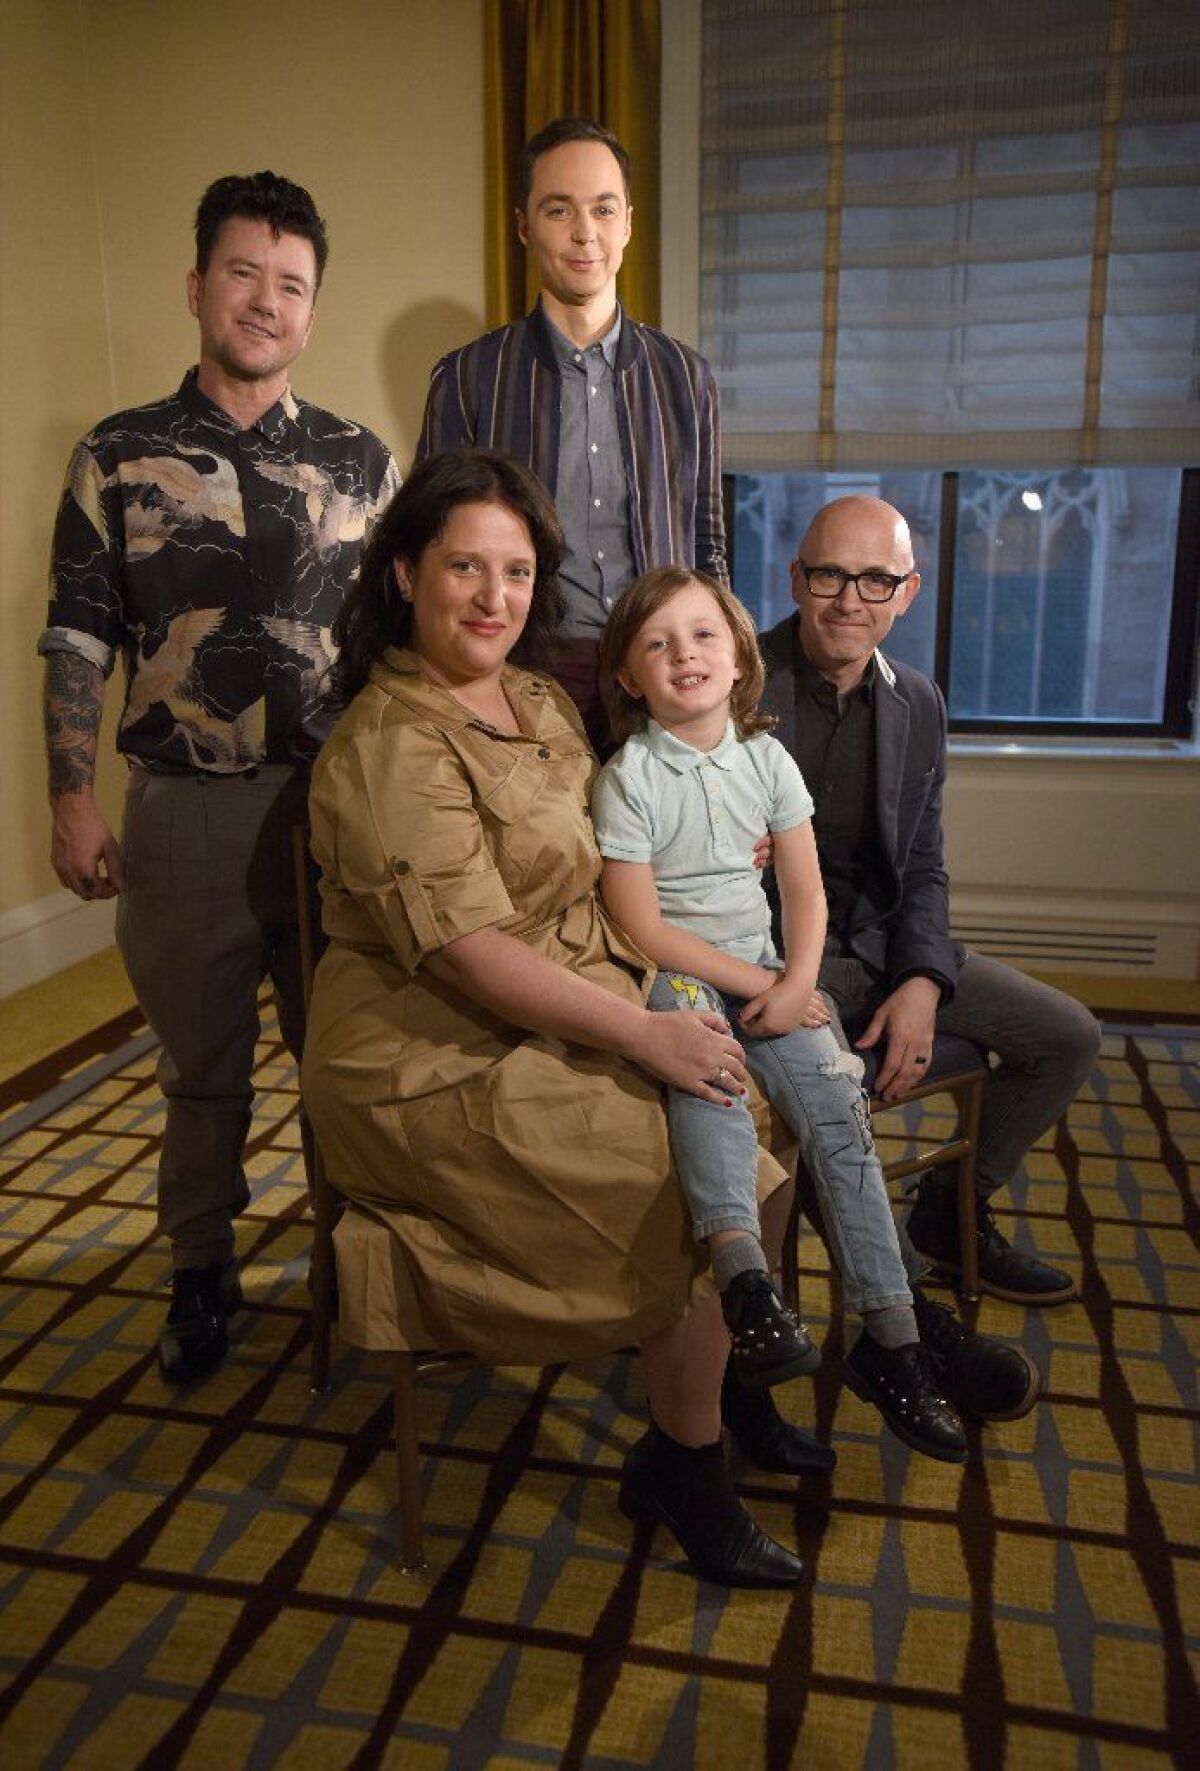 Producer and star Jim Parsons, back right, and director Silas Howard stand behind Leo James Davis and his parents, Danielle Super-Davis and Mike Davis.